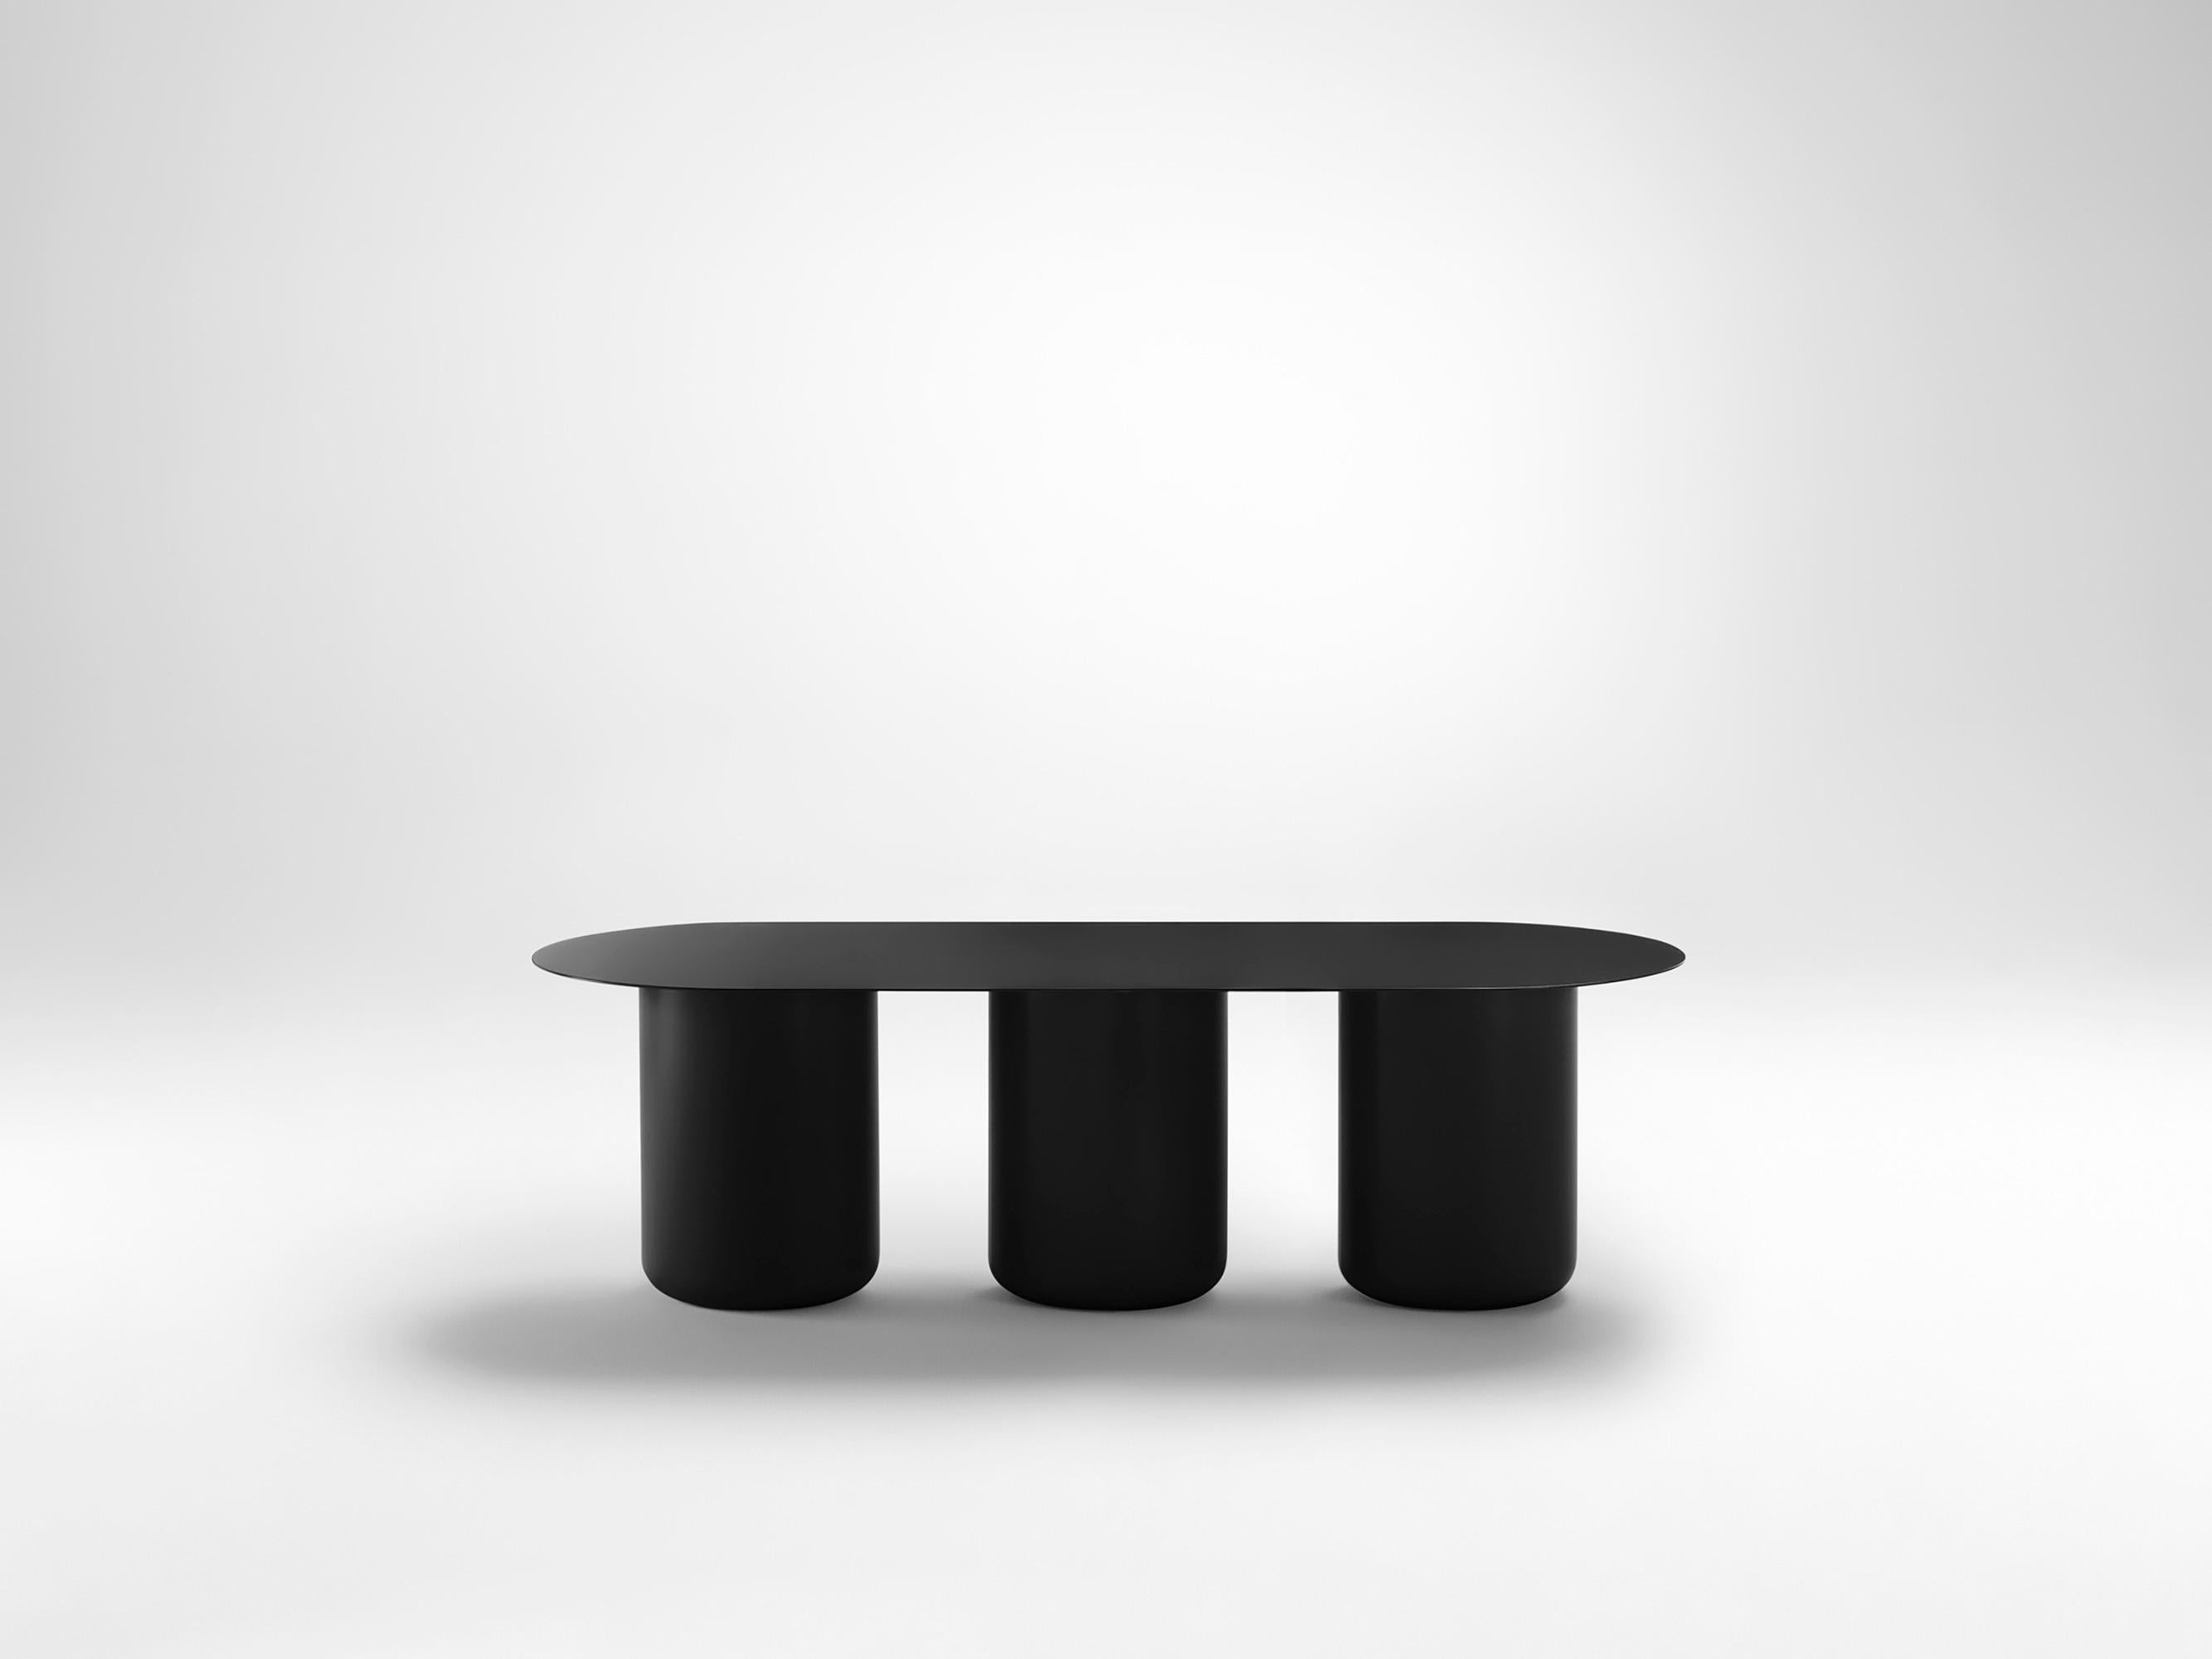 Black Table 03 by Coco Flip
Dimensions: D 48 / 122 x H 32 / 36 / 40 / 42 cm
Materials: Mild steel, powder-coated with zinc undercoat. 
Weight: 30 kg

Coco Flip is a Melbourne based furniture and lighting design studio, run by us, Kate Stokes and